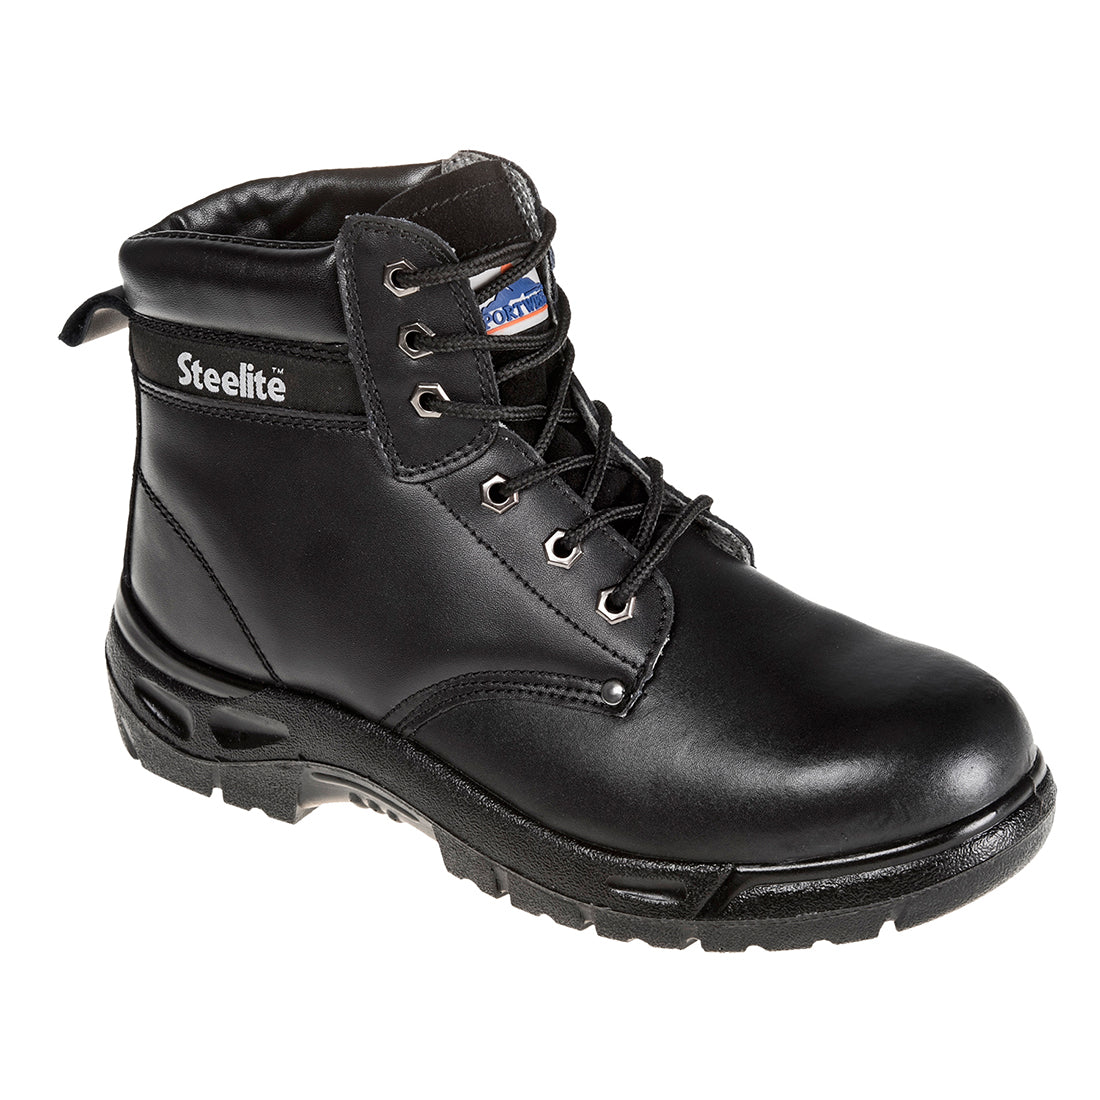 PORTWEST SIZE 12 / 47 FW03 Black Steelite Boot S3 Steel toe safety boot rigger